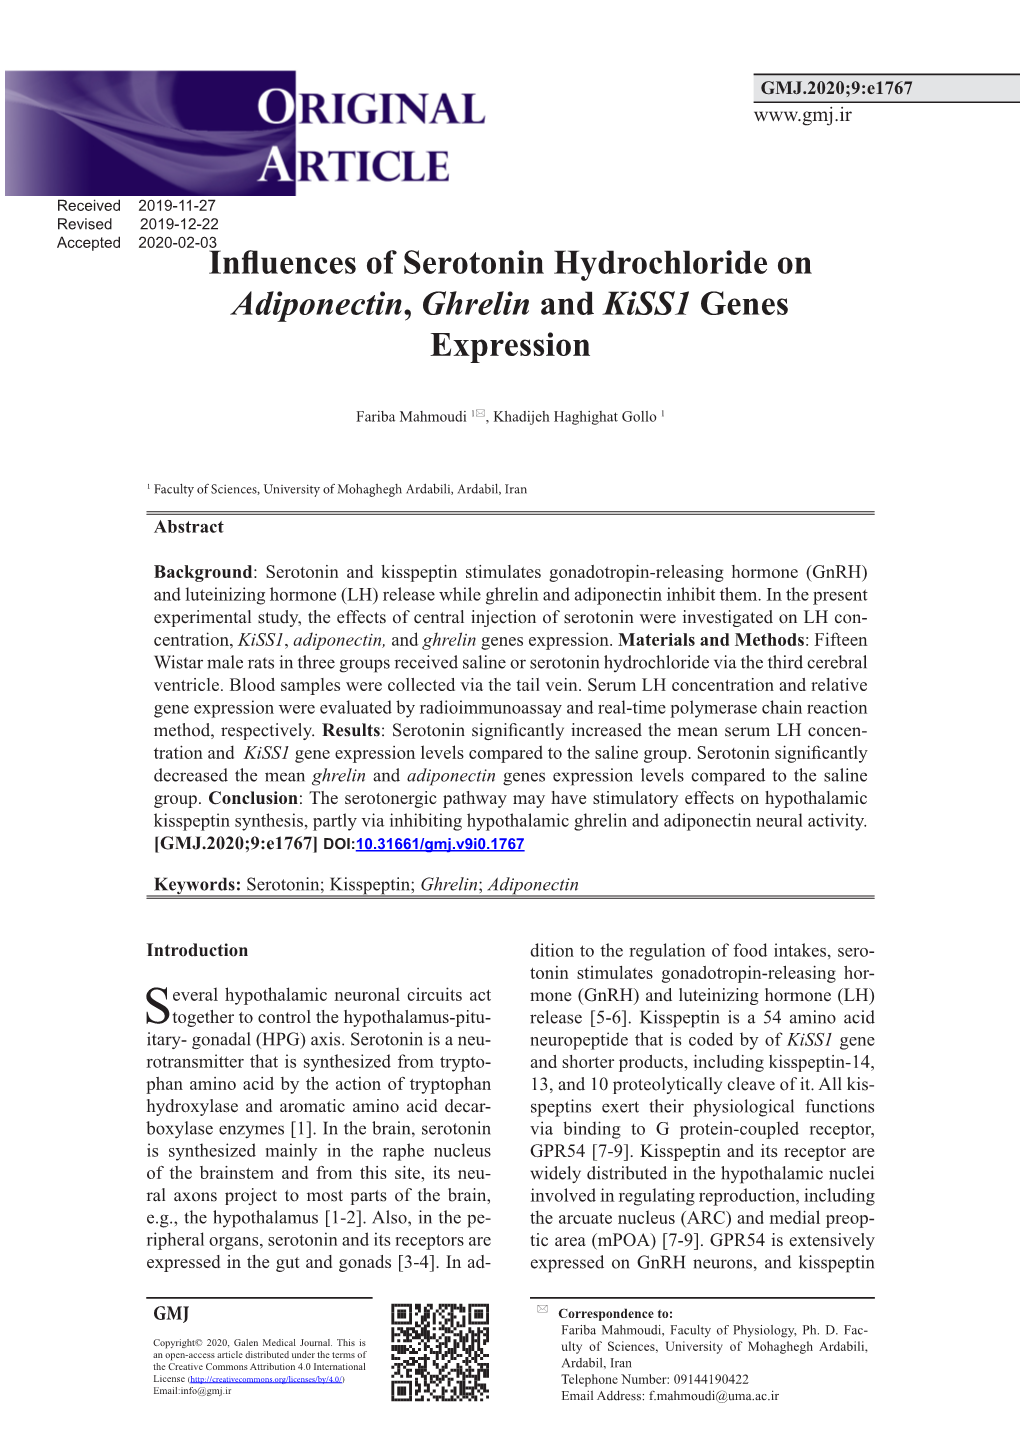 Influences of Serotonin Hydrochloride on Adiponectin, Ghrelin and Kiss1 Genes Expression